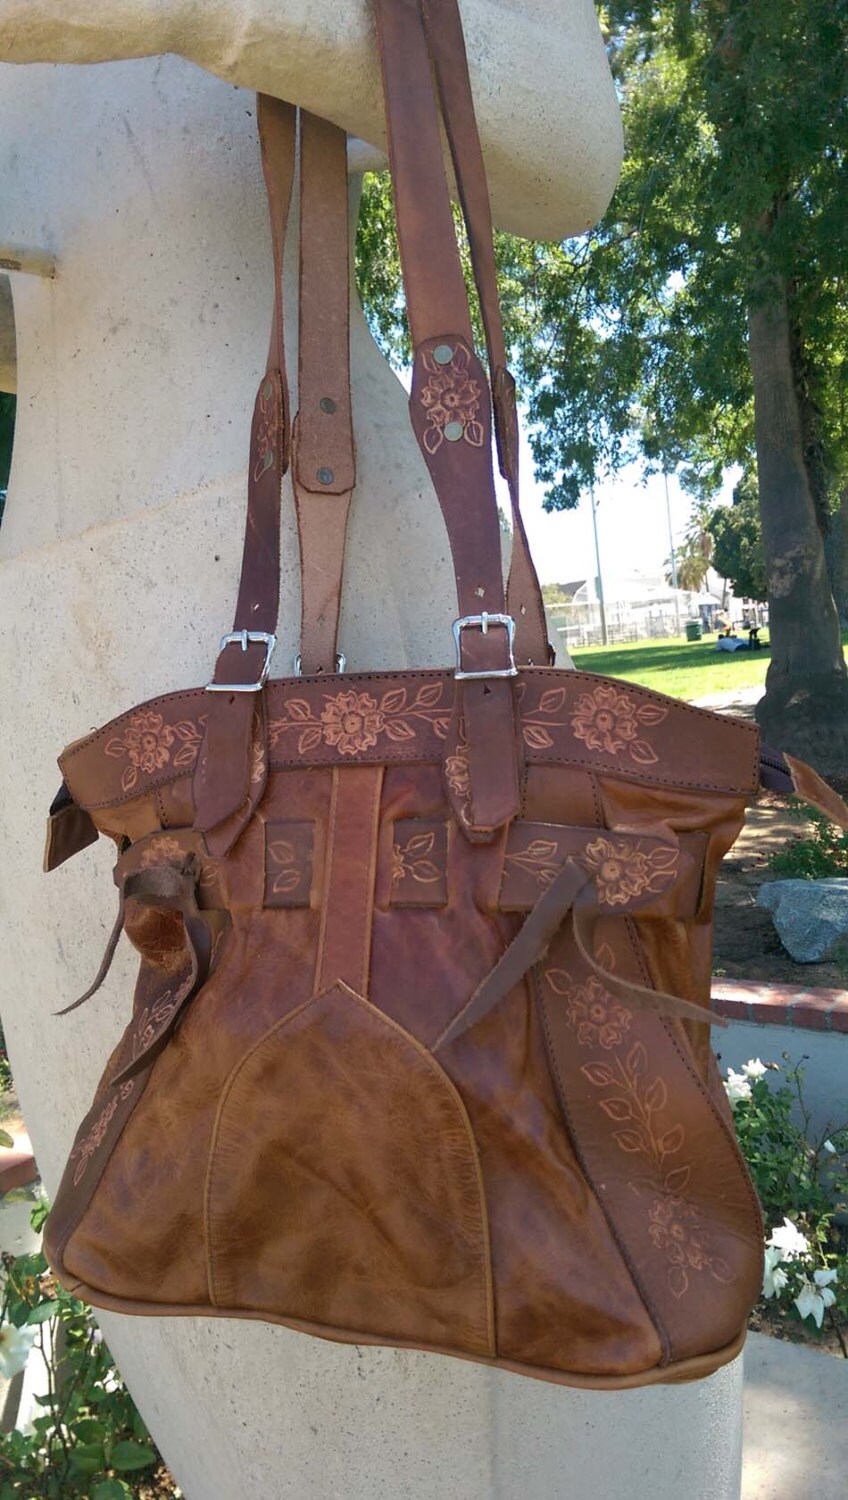 Authentic Mexican Hand-tooled Leather Purses by VegaLeatherGoods